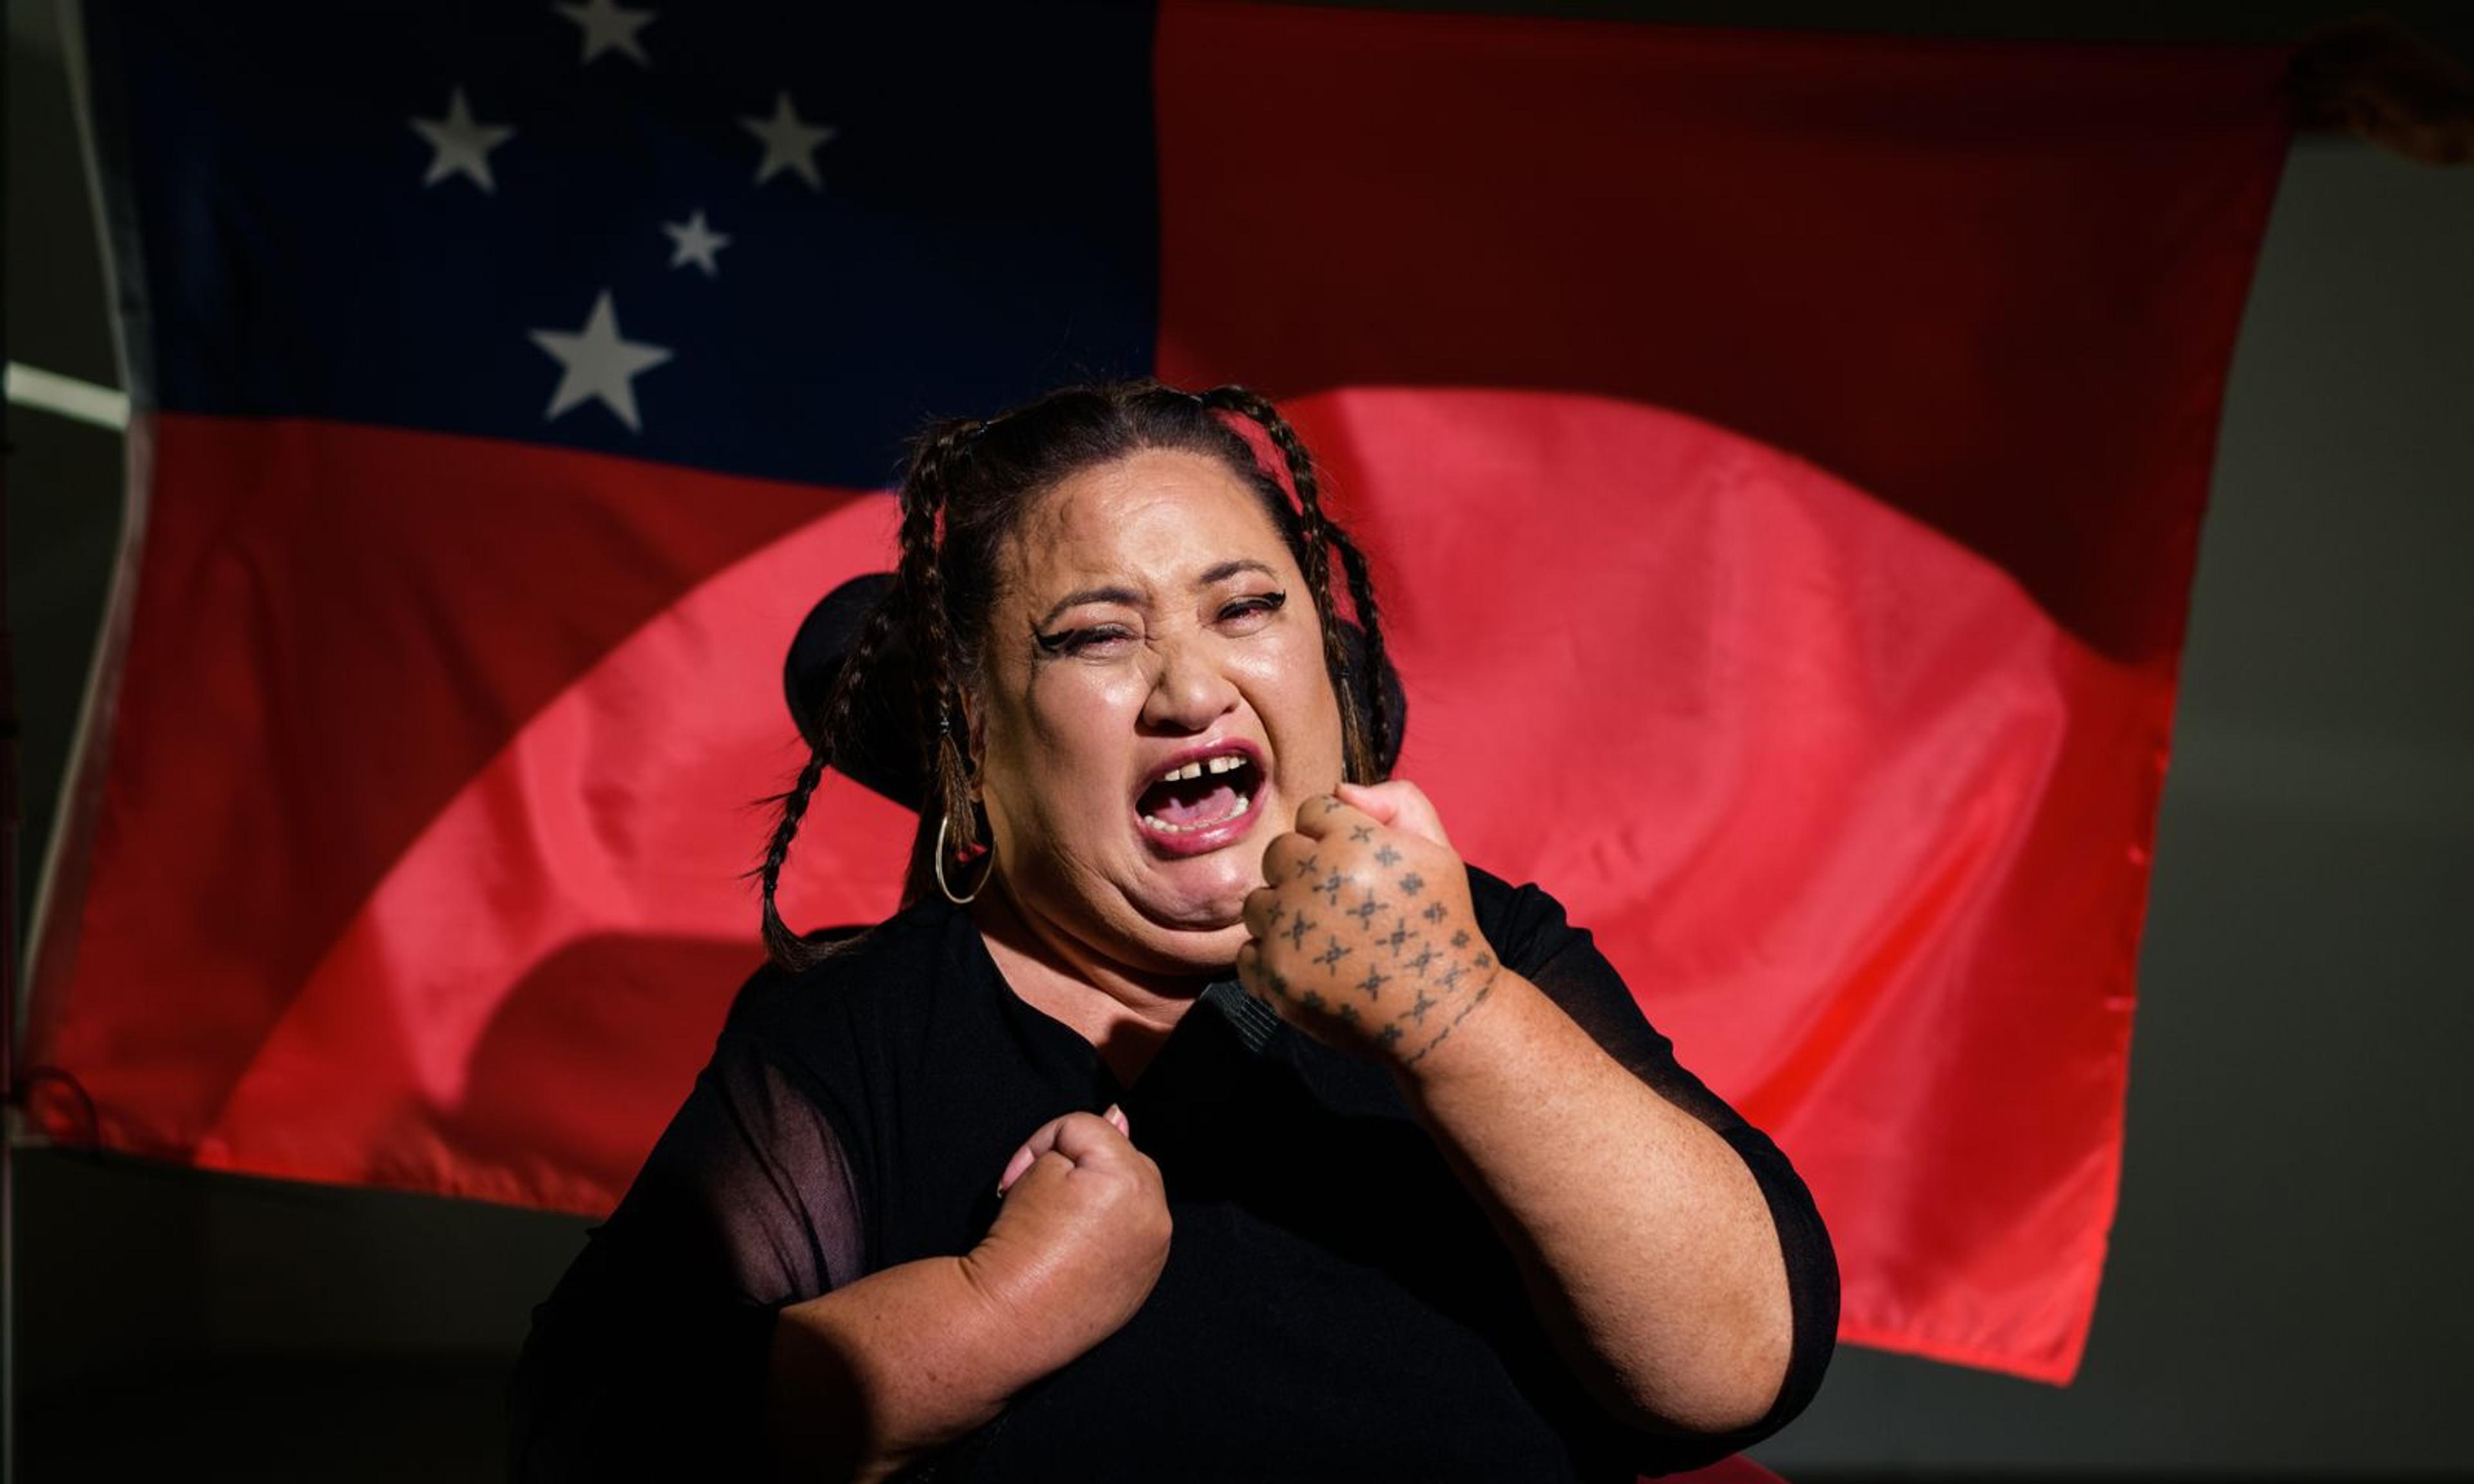 The powerful life story of disabled artist Lusi Faiva comes to life in the theatre show AIGA.